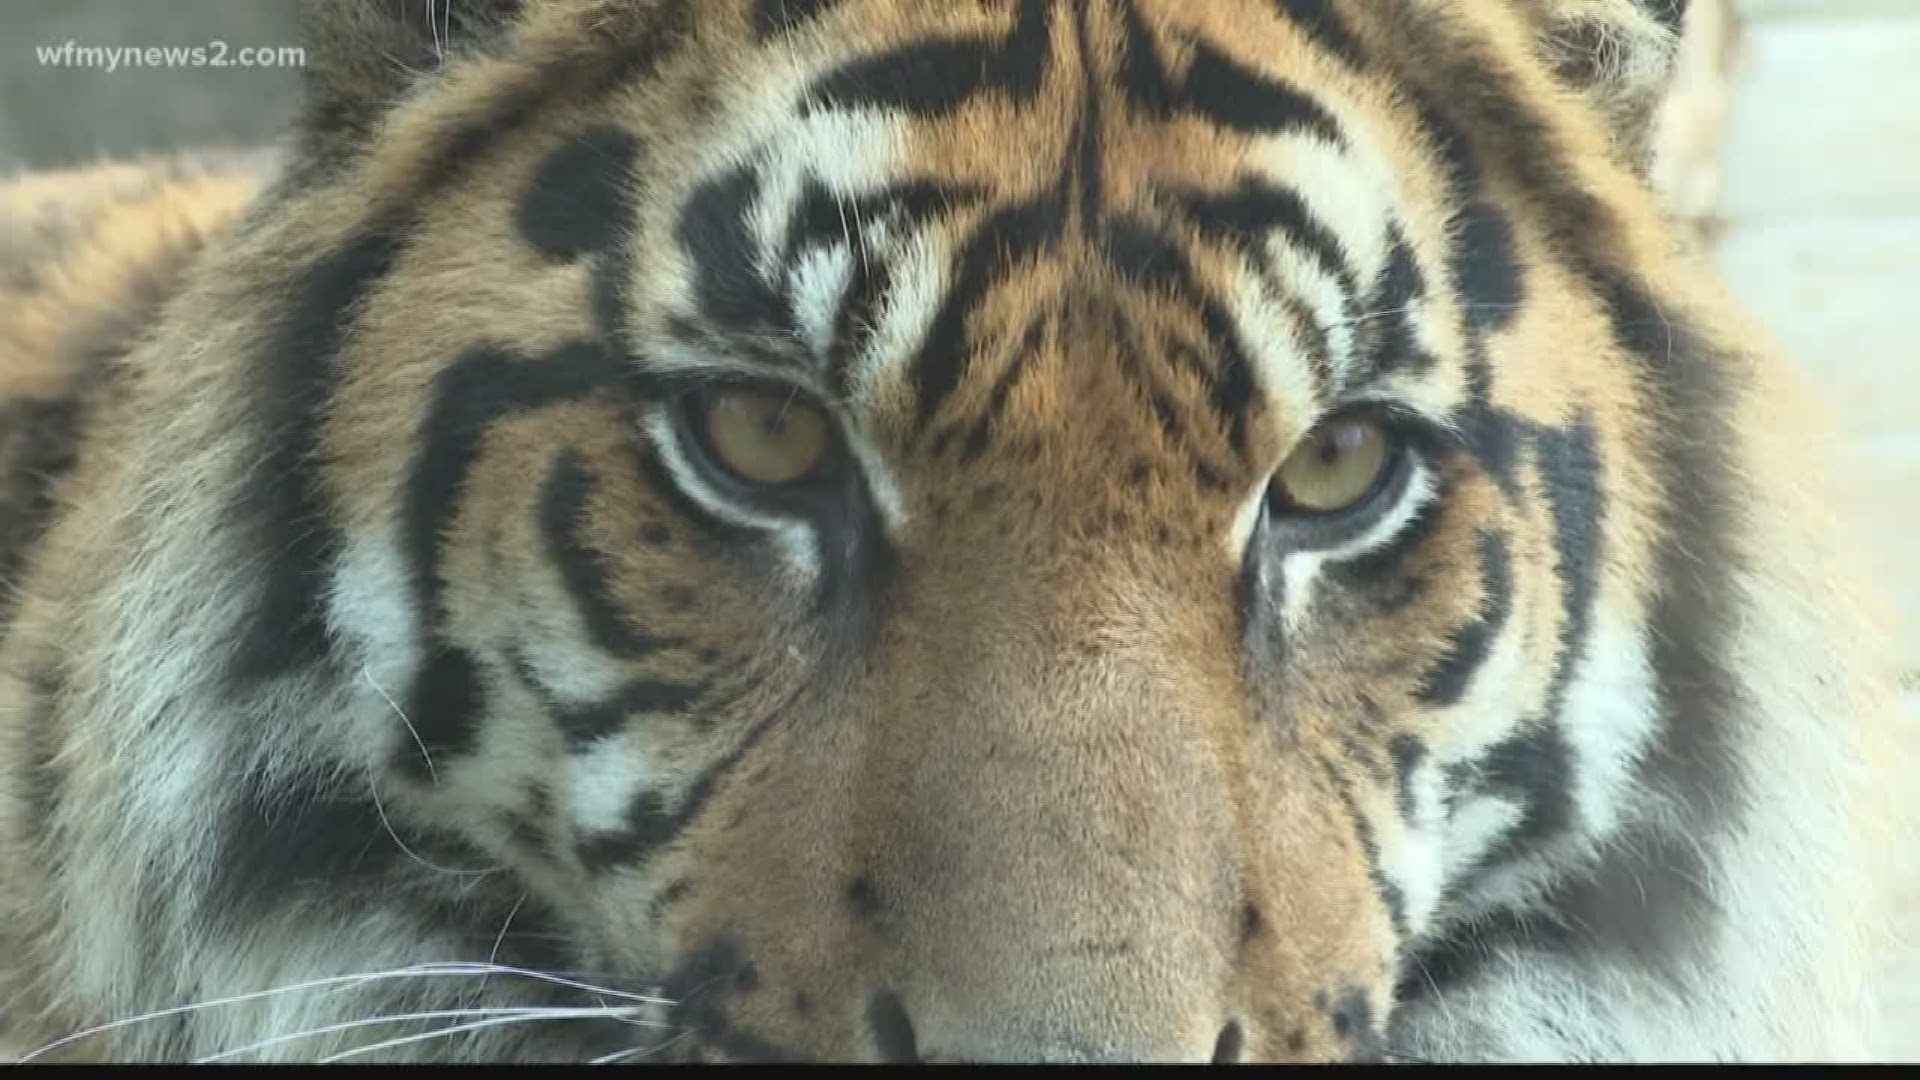 Eric Chilton ventured to the Greensboro Science Center to meet its newest tigers.